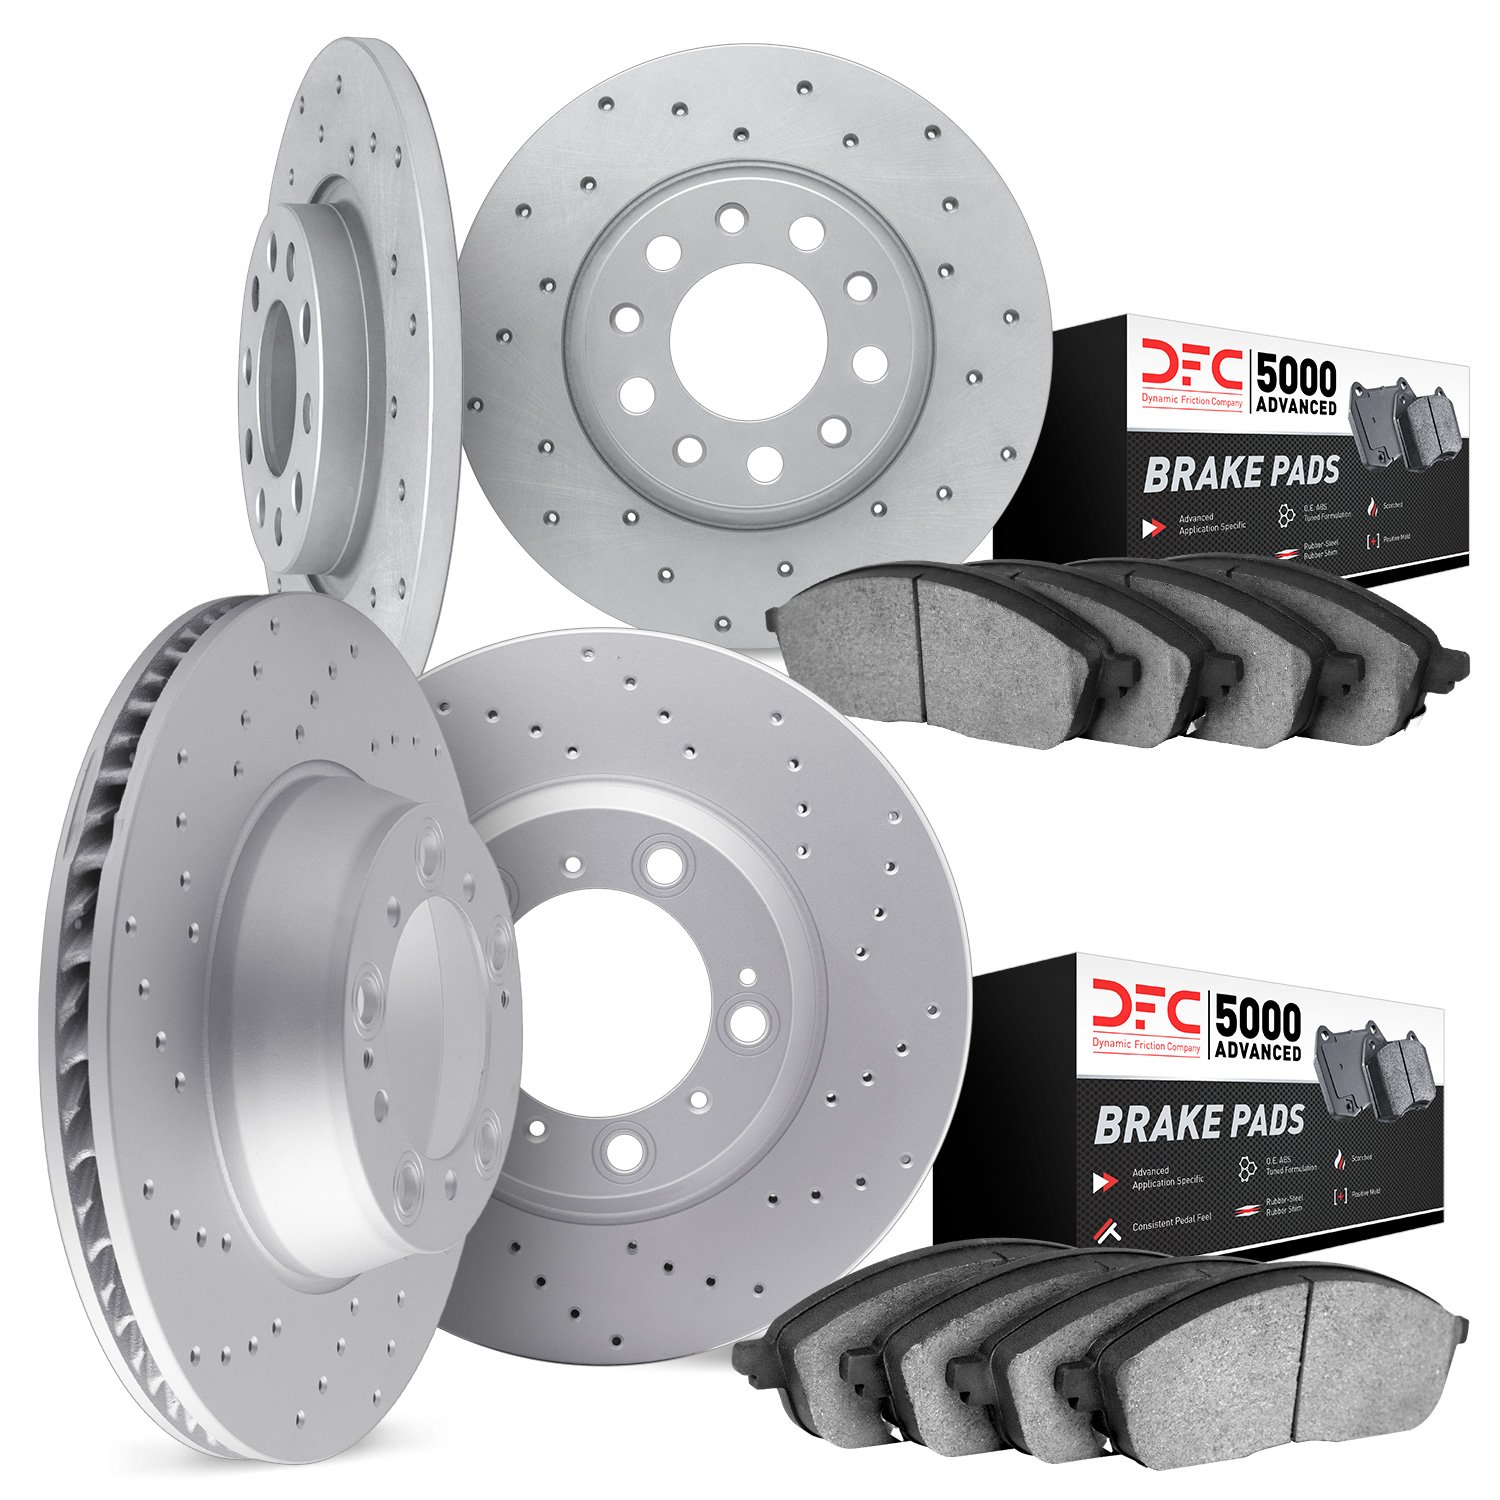 2704-59029 Geoperformance Drilled Brake Rotors with Active Performance Pads Kit, 2012-2012 Acura/Honda, Position: Front and Rear